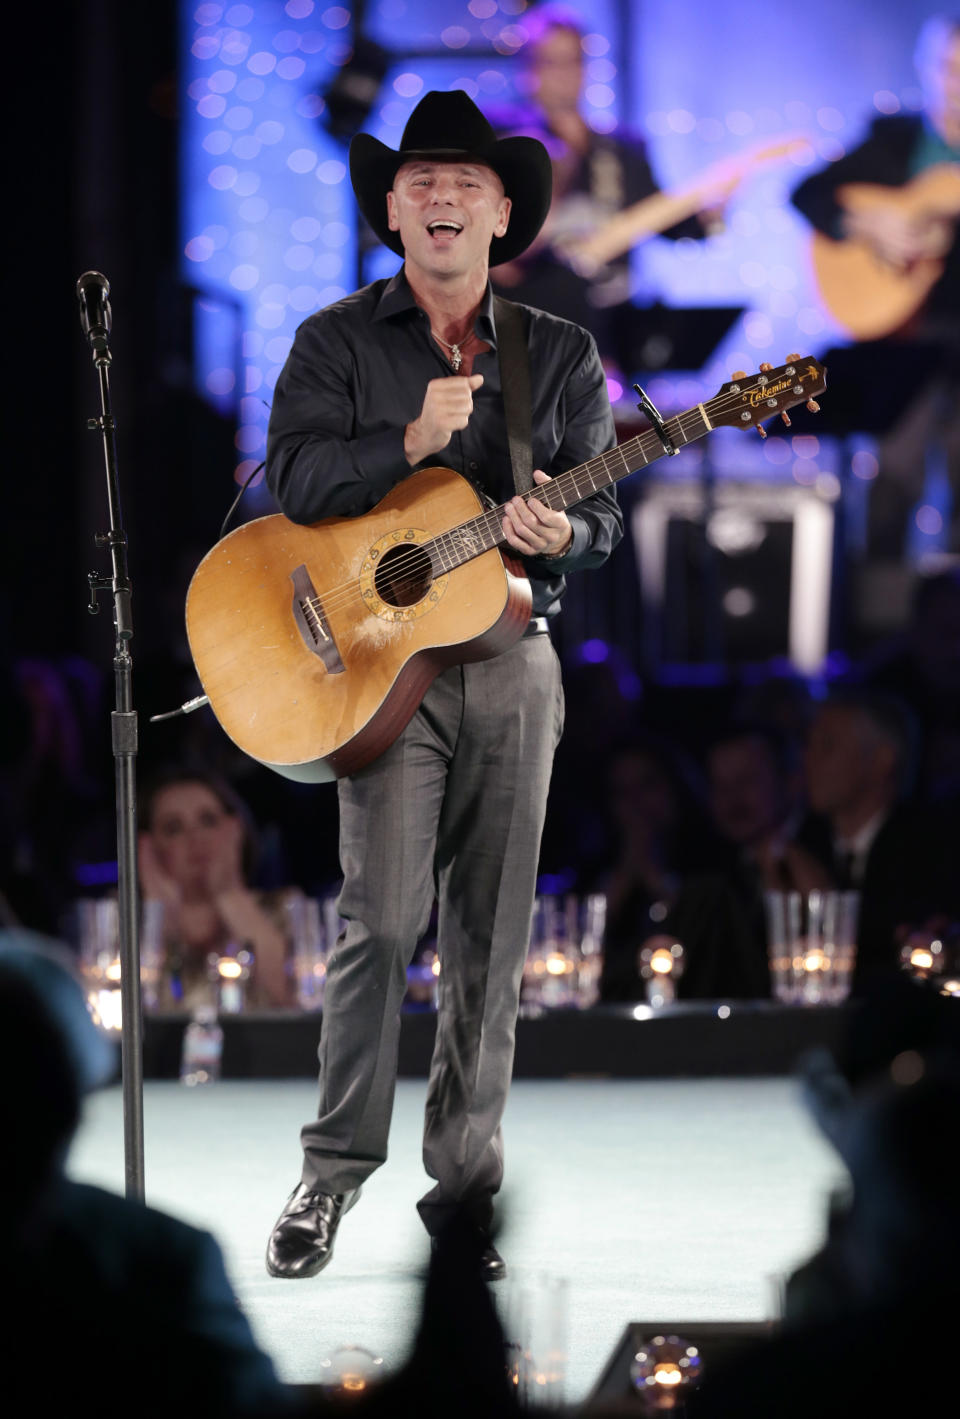 Kenny Chesney performs during a tribute to songwriter Dean Dillon at the BMI Country Awards on Tuesday, Nov. 5, 2013, in Nashville, Tenn. (AP Photo/Mark Humphrey)